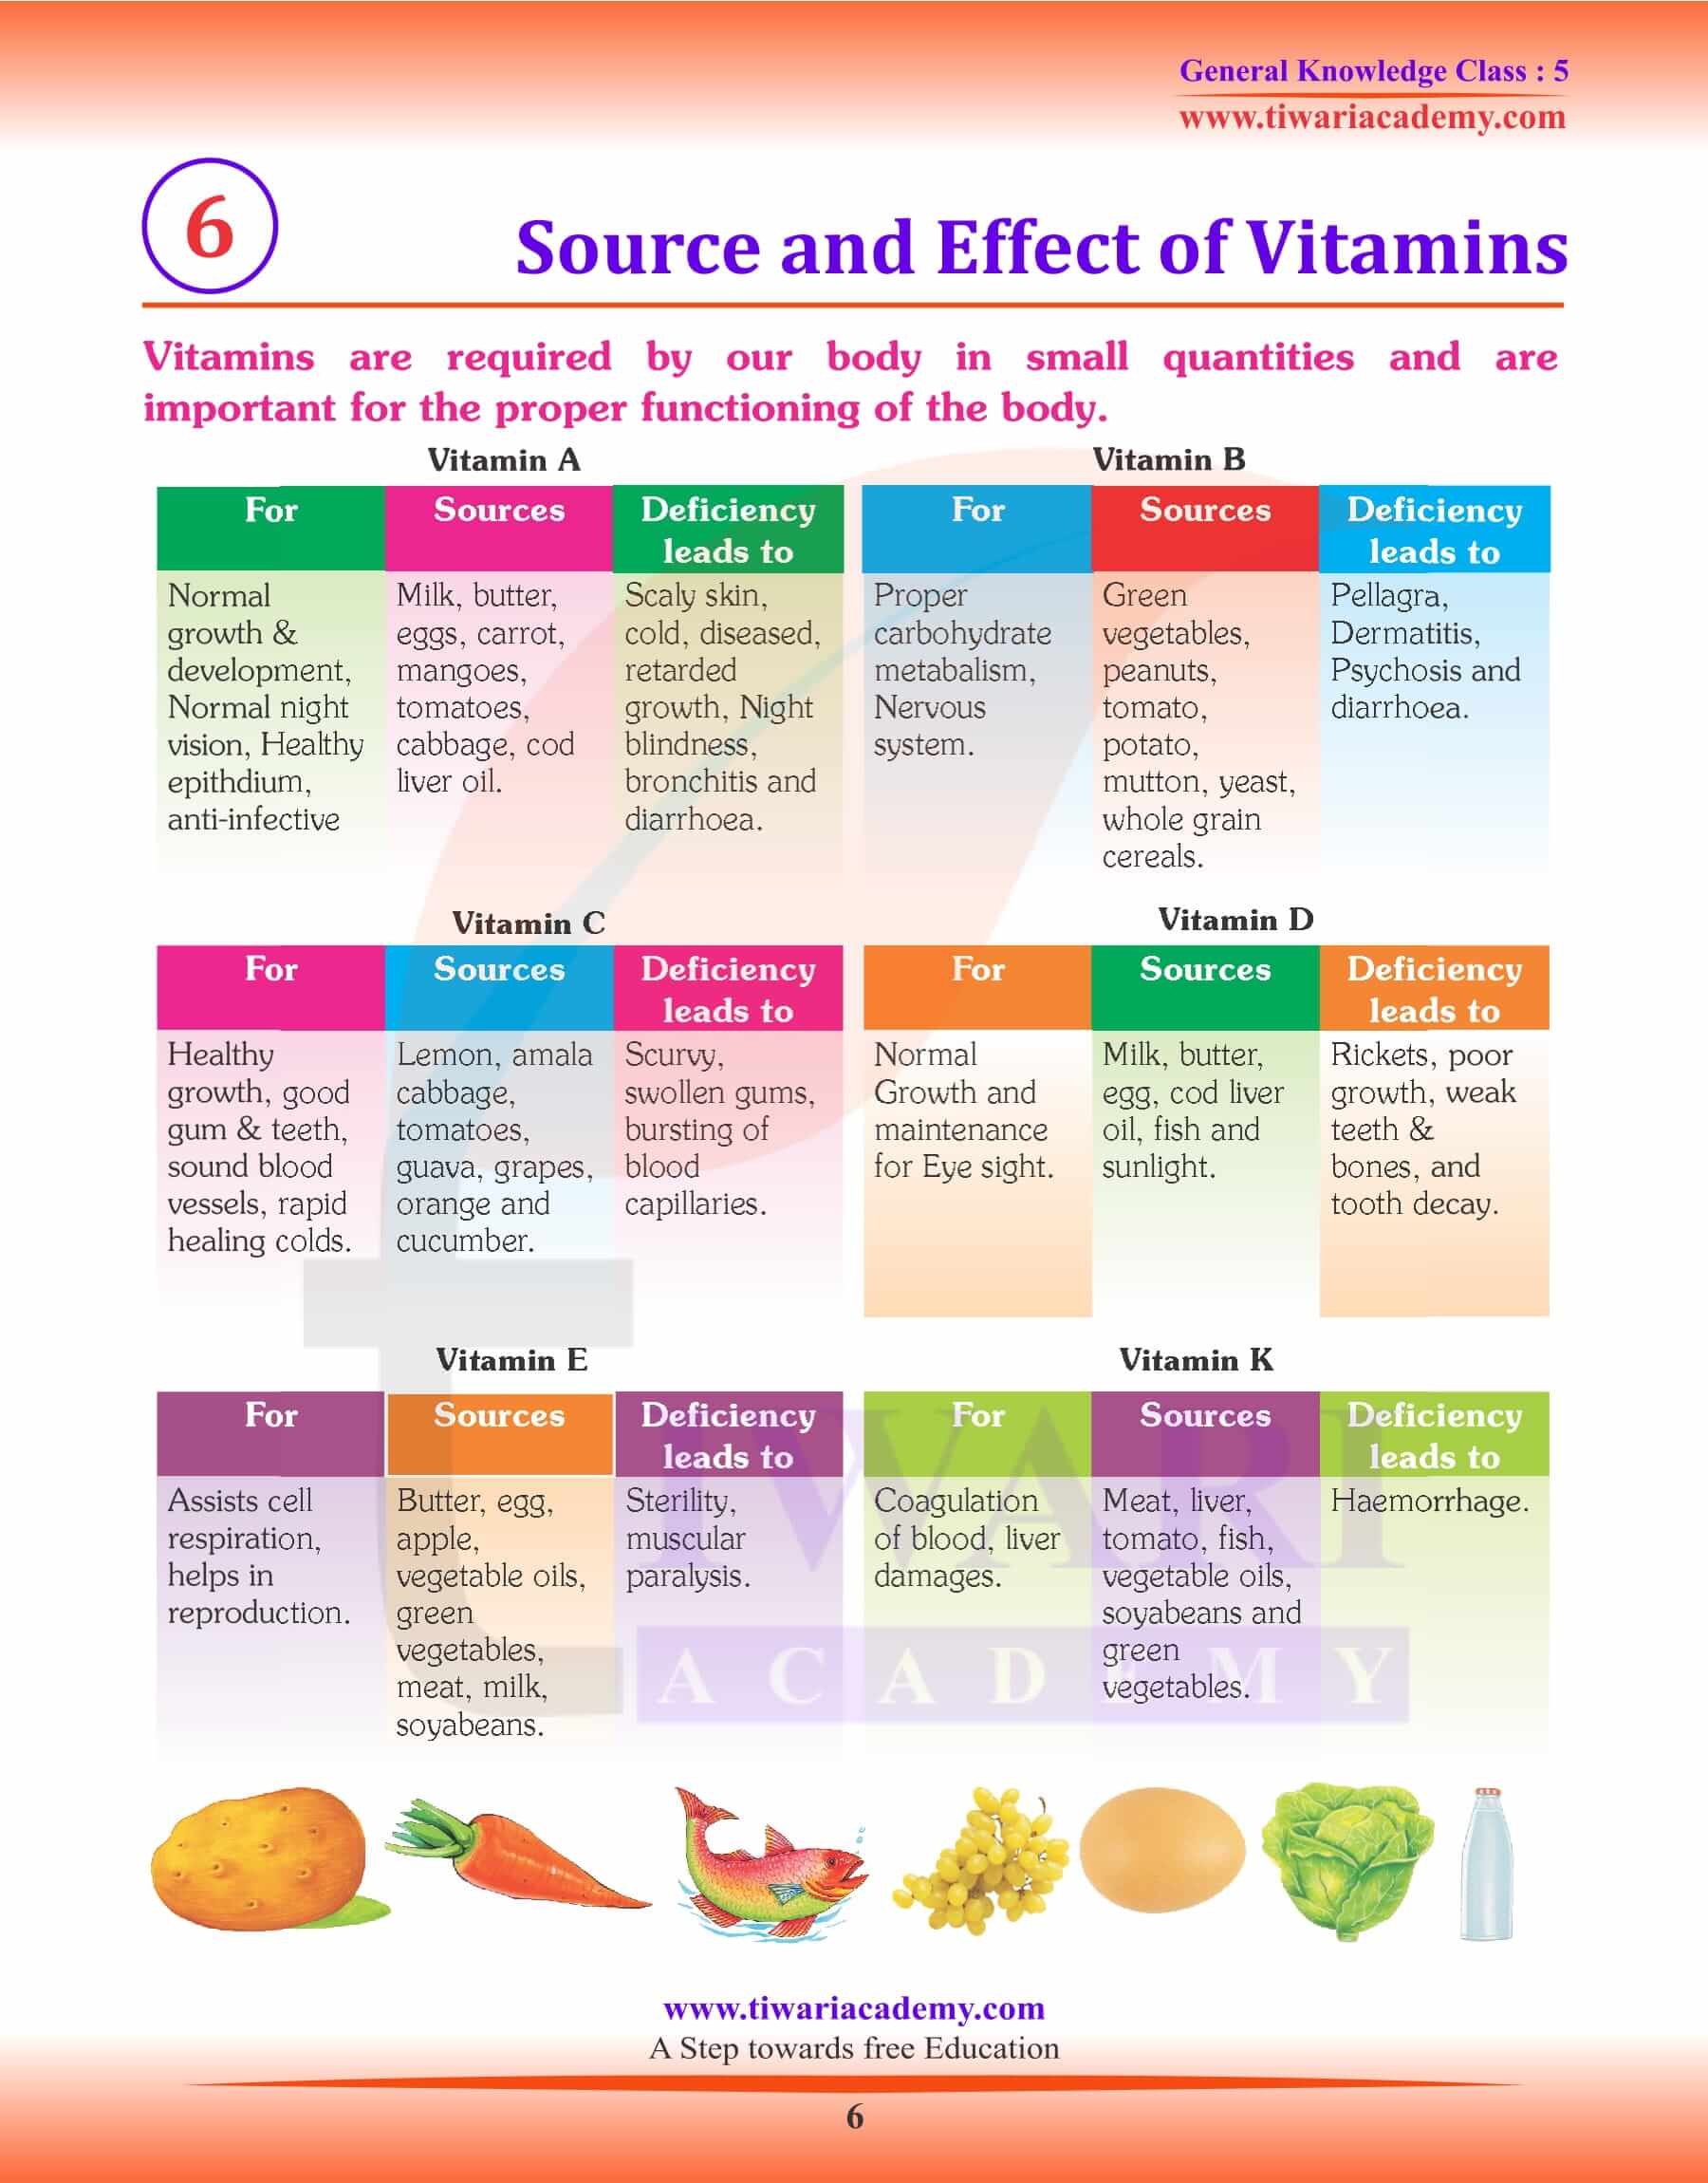 Source and Effect of Vitamins